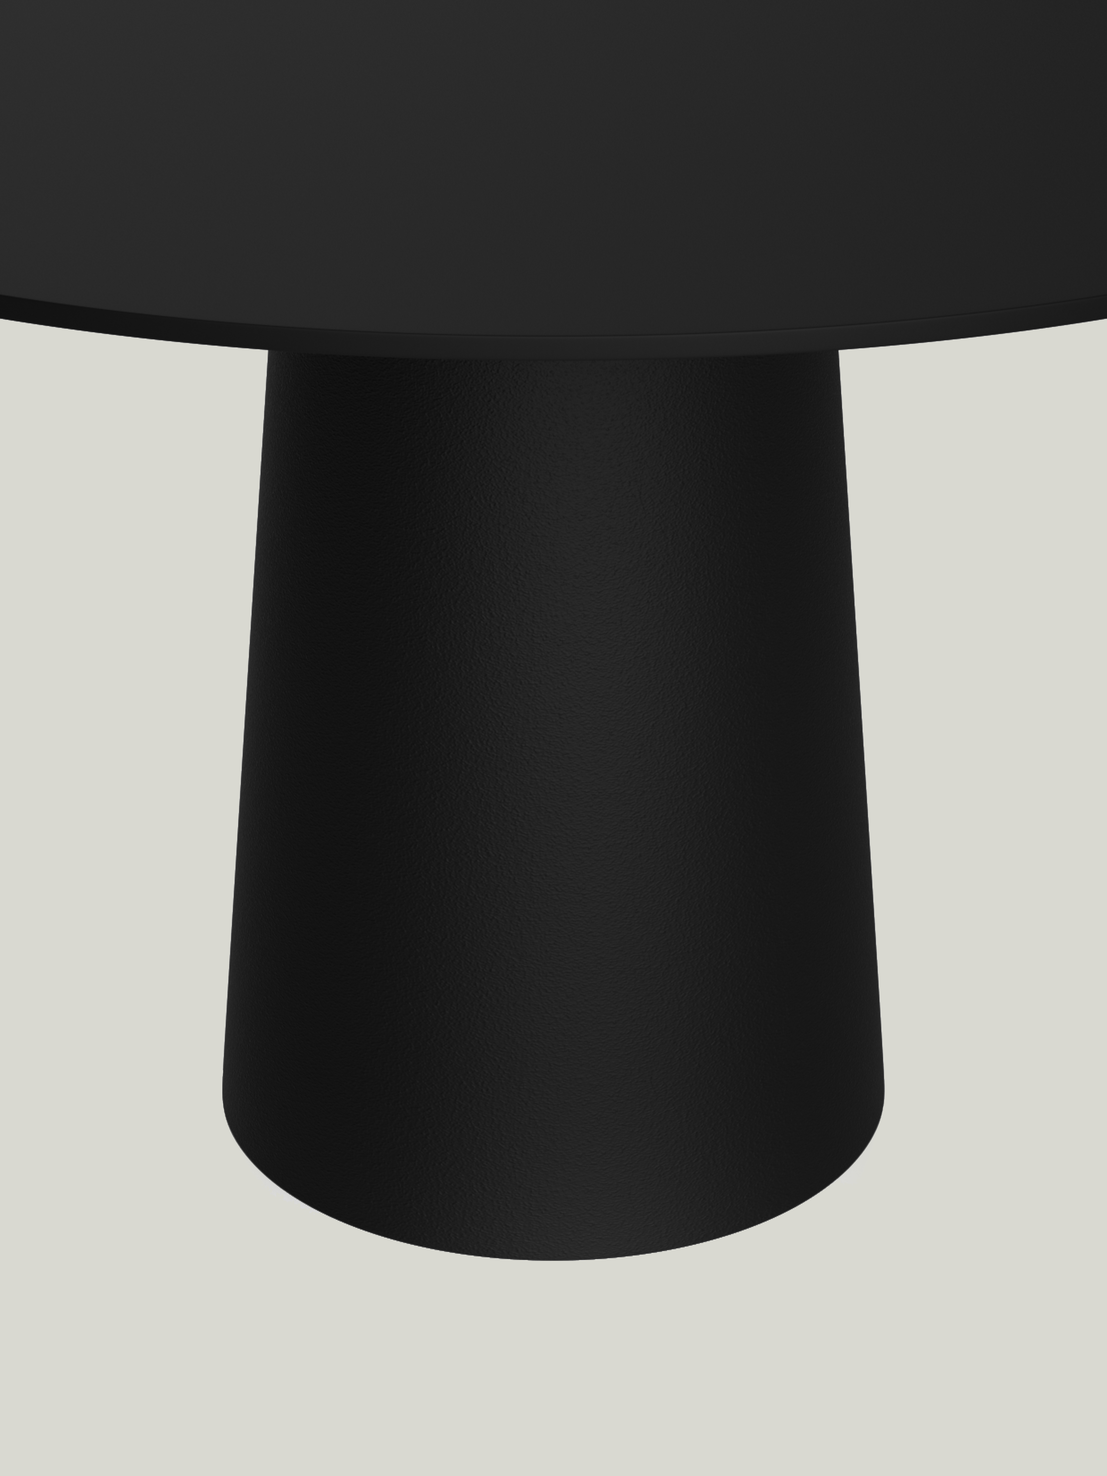 Container Table round black detail